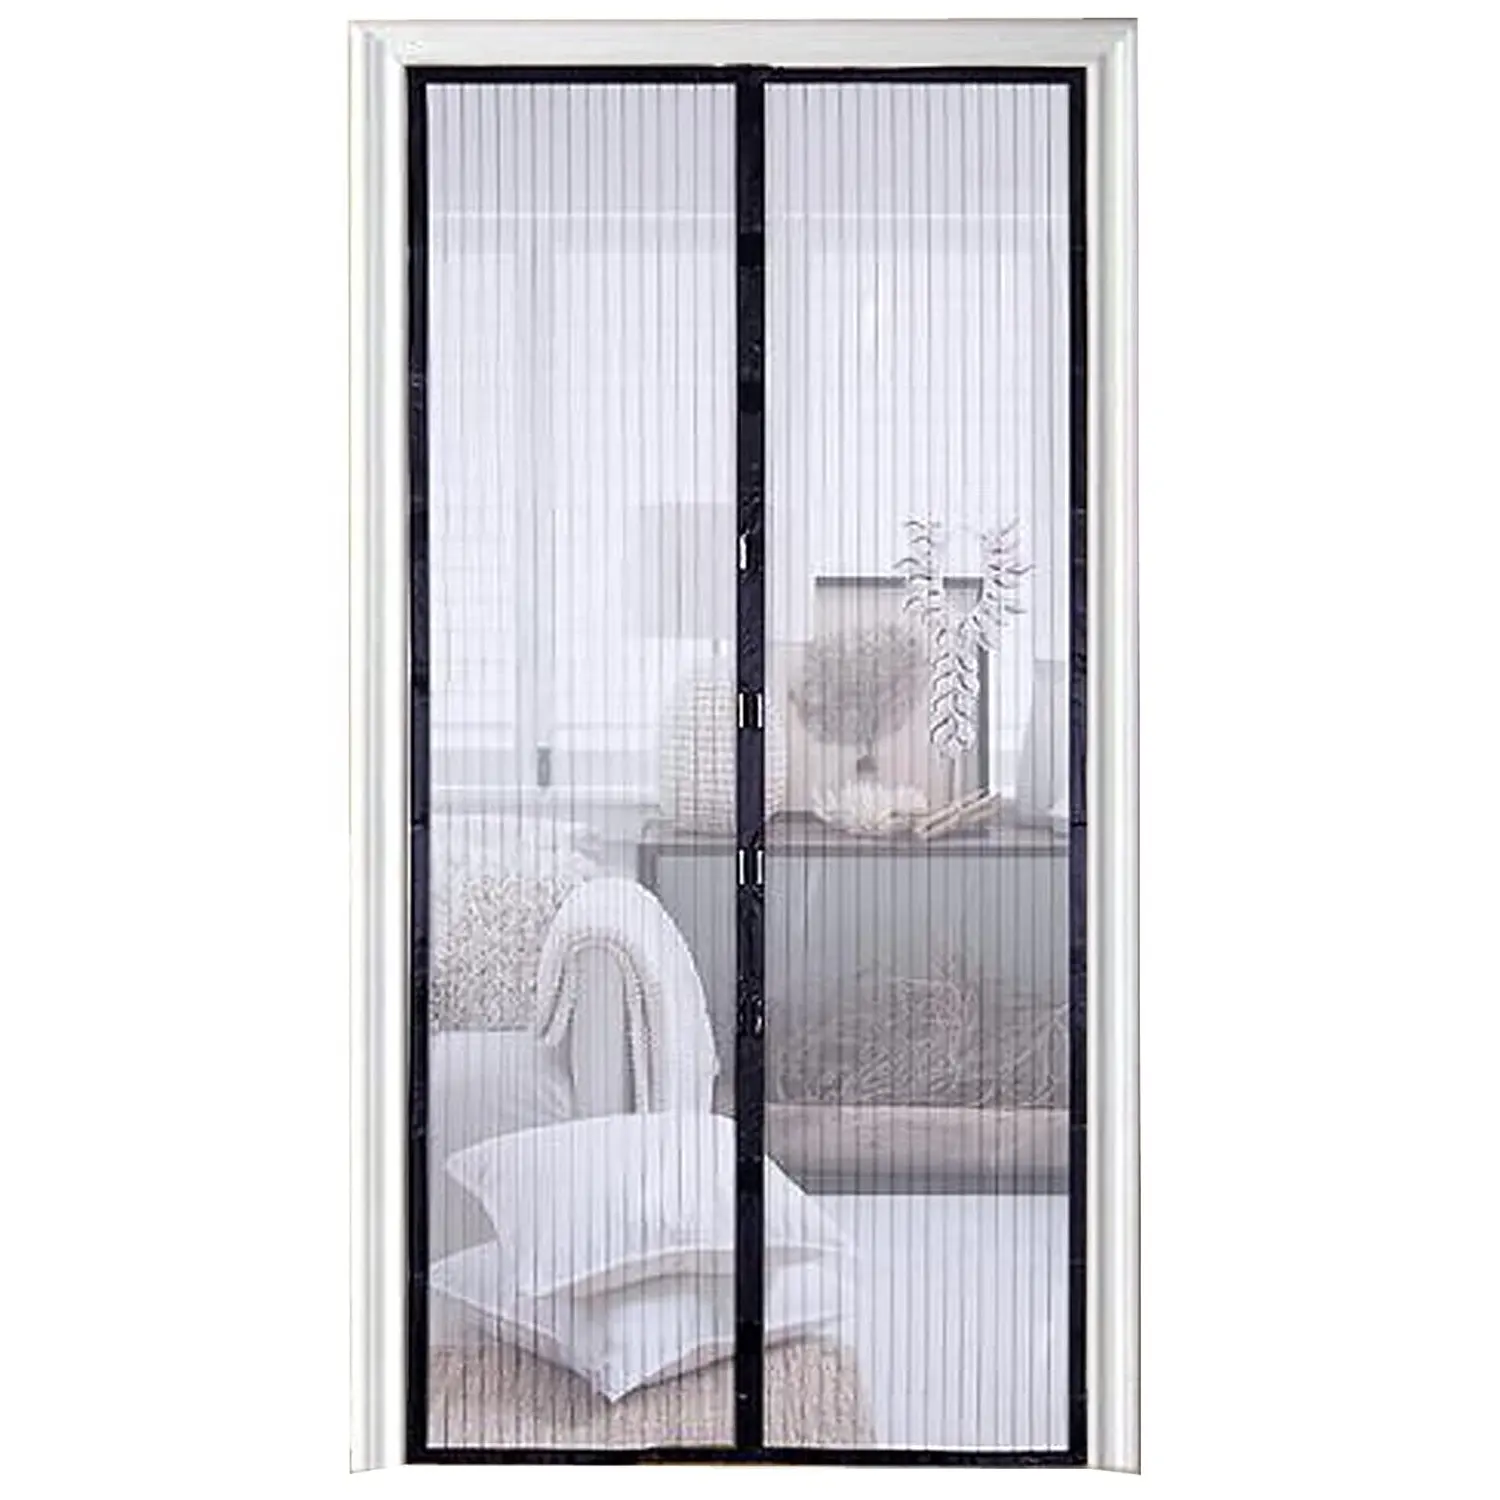 Door Curtain Mesh Magnet Fastening Hands Free Fly Bug Insect Screen Lowes